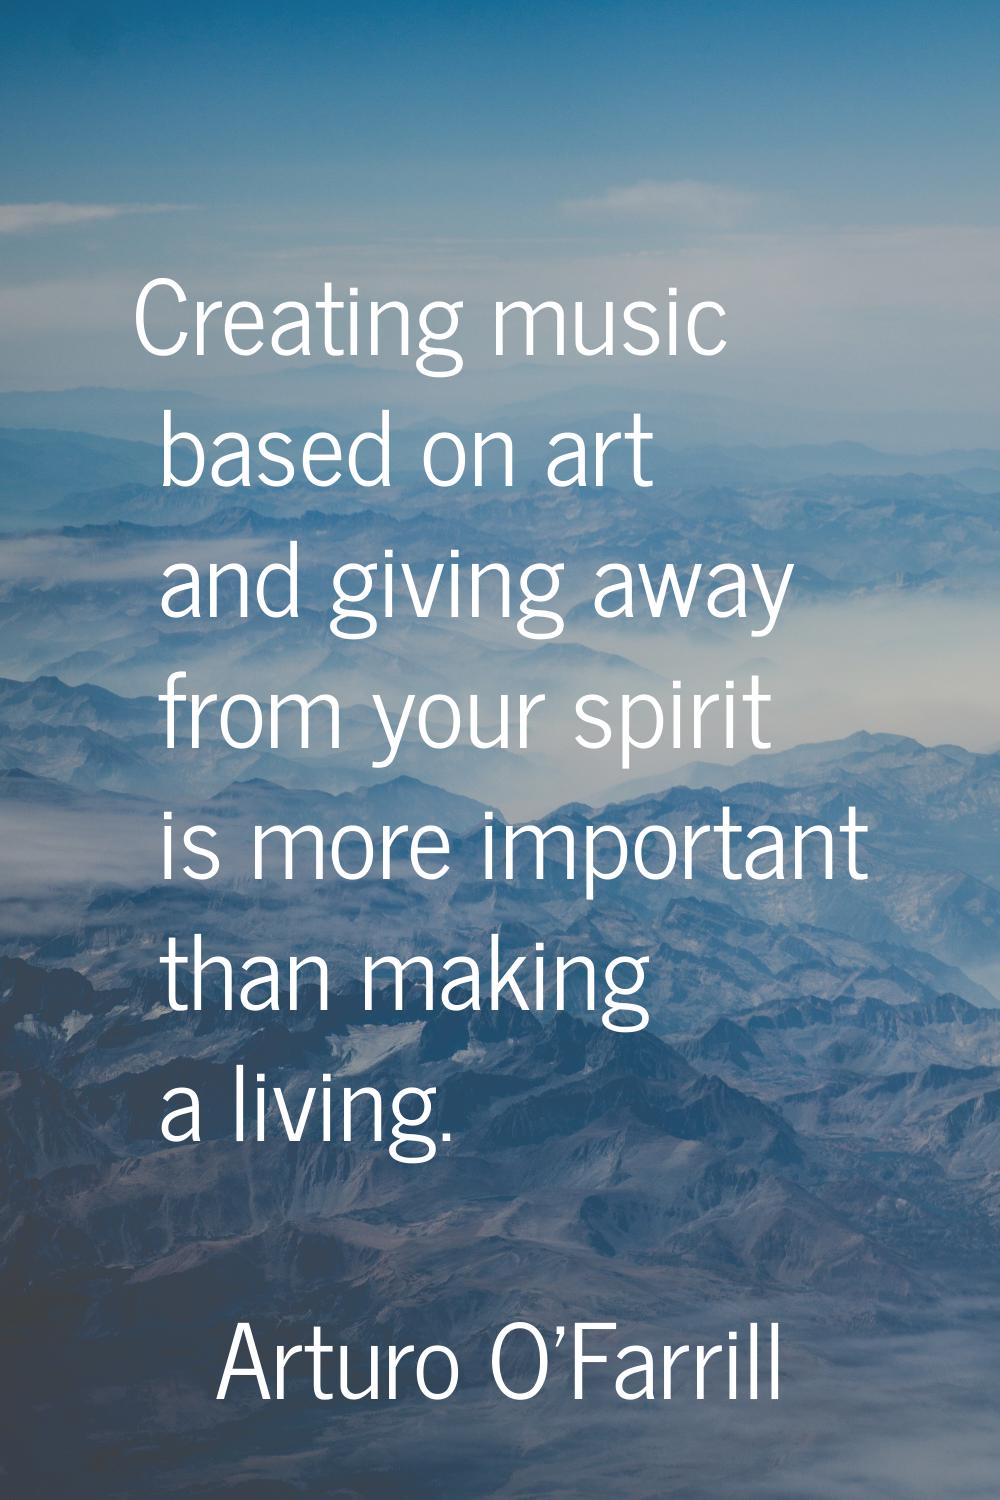 Creating music based on art and giving away from your spirit is more important than making a living